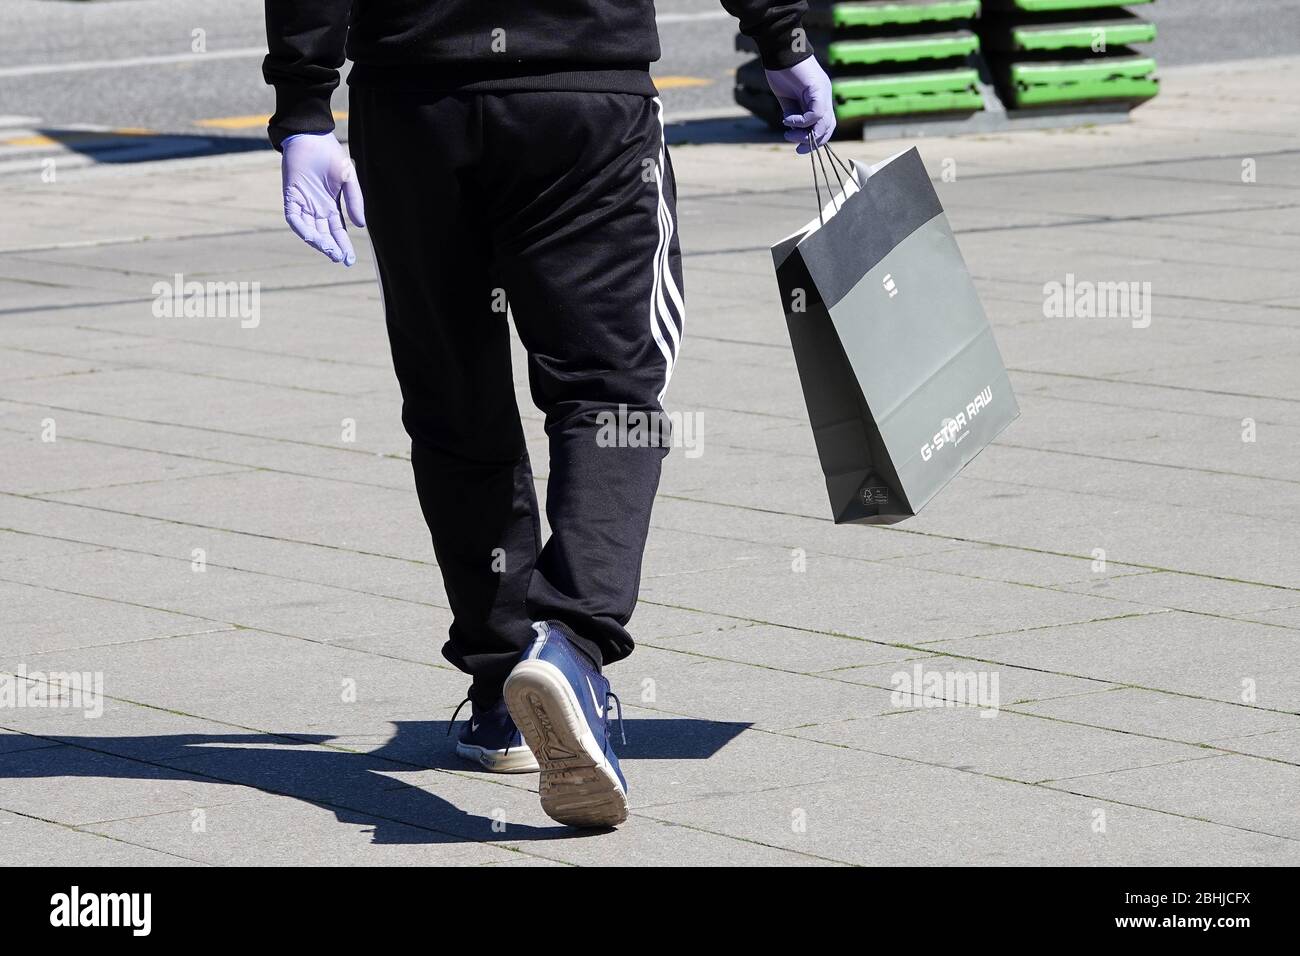 Hamburg, Germany. 20th Apr, 2020. A passer-by wearing plastic gloves and a G -Star Raw shopping bag is walking through downtown Hamburg. Credit: Bodo  Marks/dpa/Alamy Live News Stock Photo - Alamy